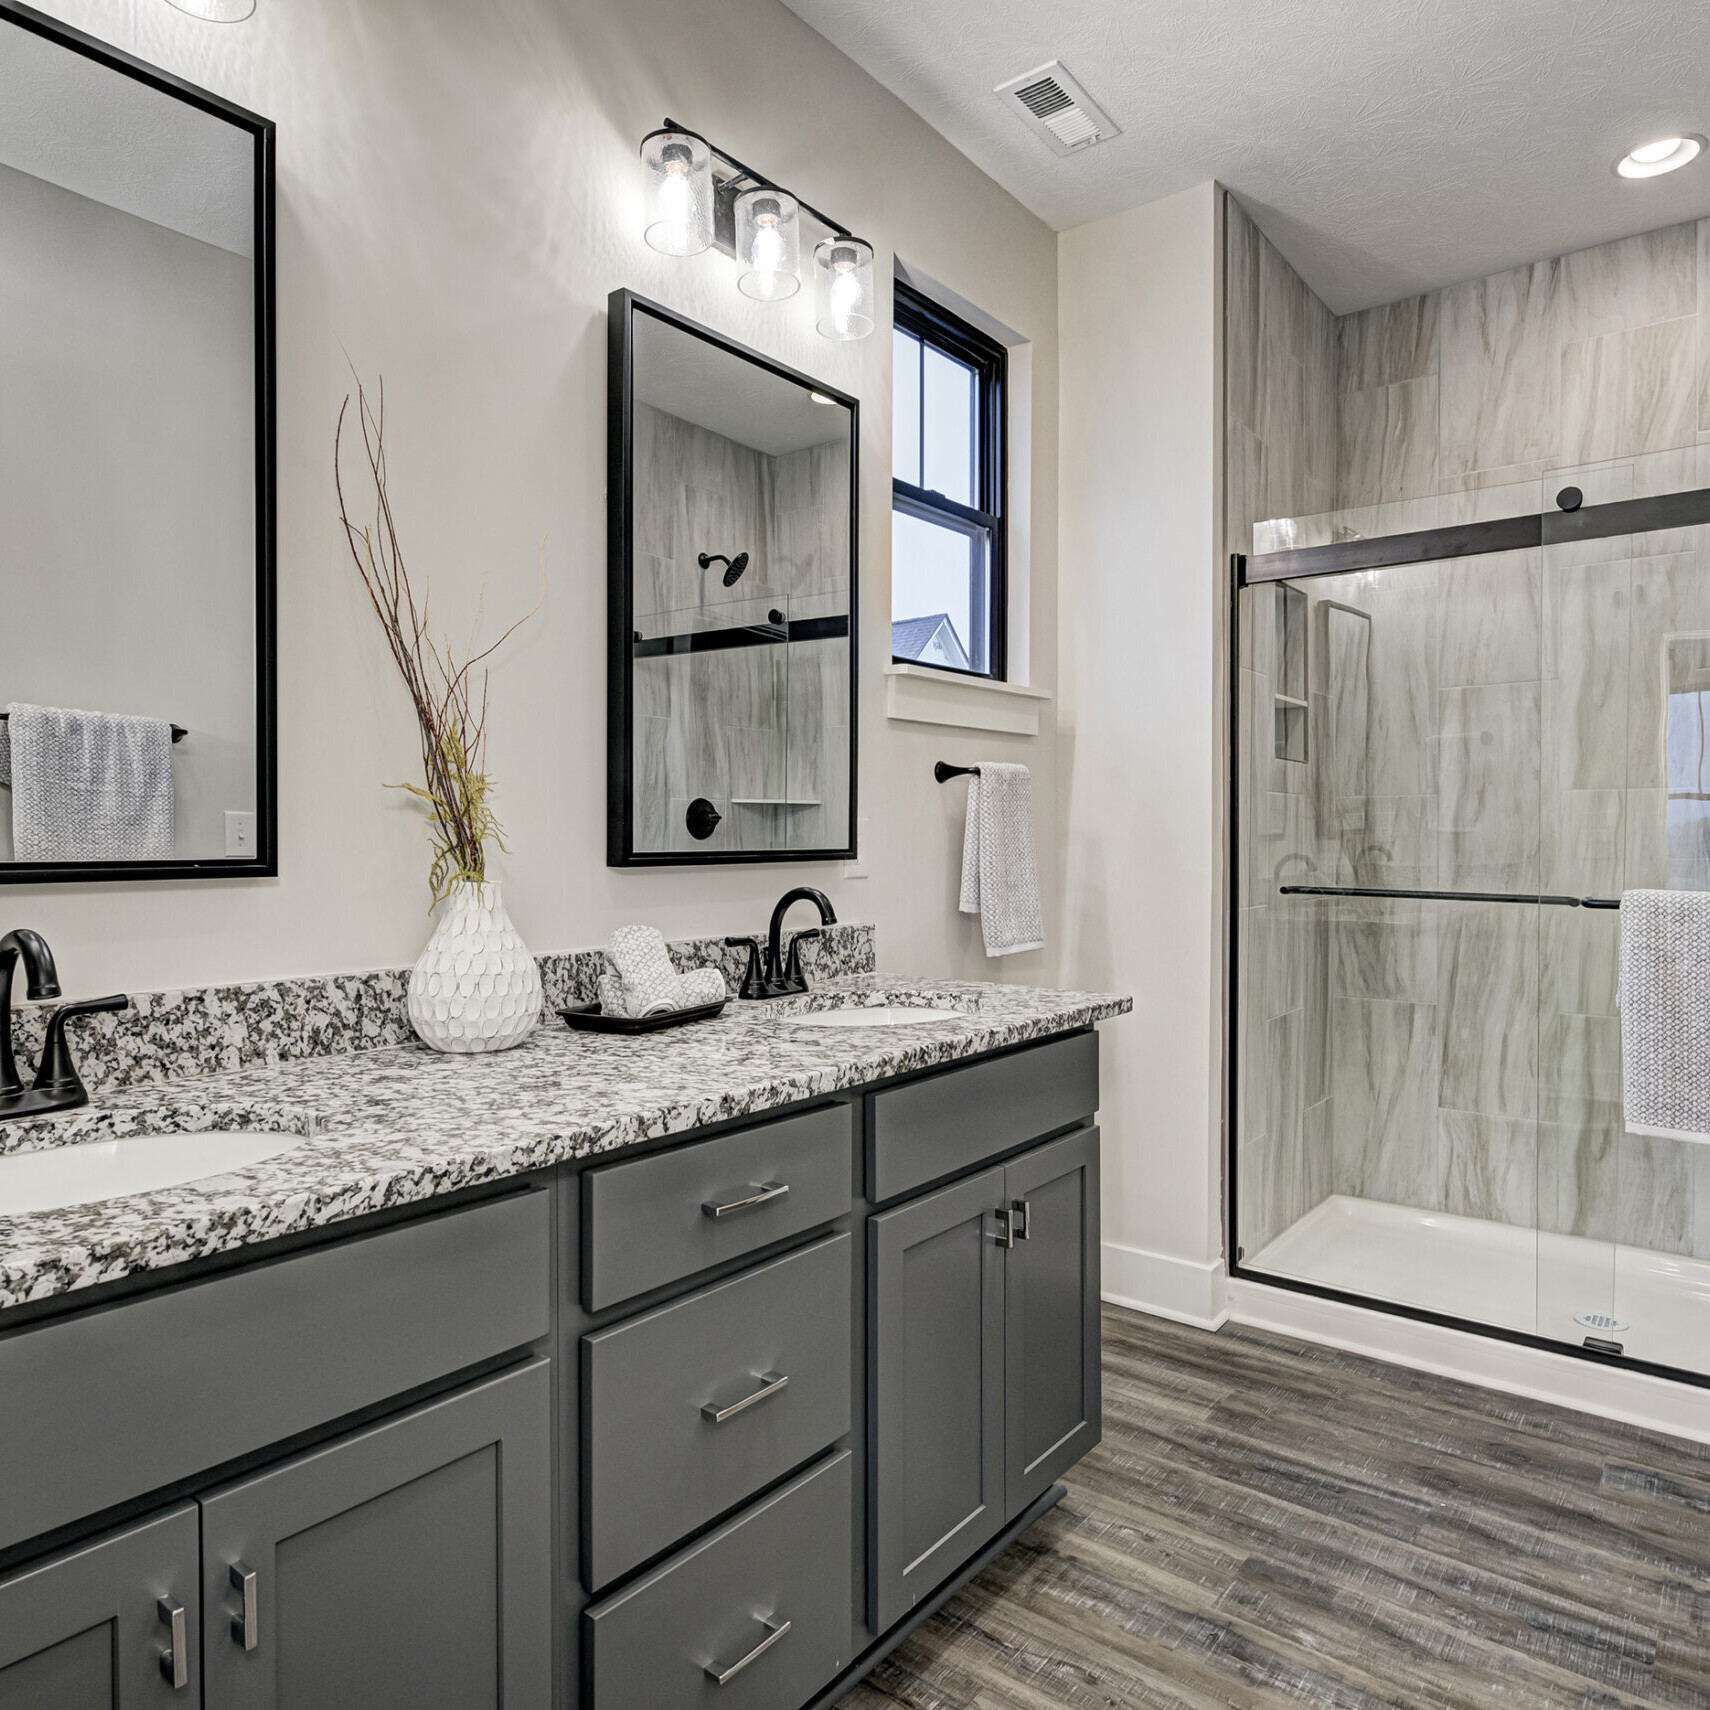 A bathroom with gray cabinets and granite counter tops, built by a custom home builder in Fishers, Indiana.